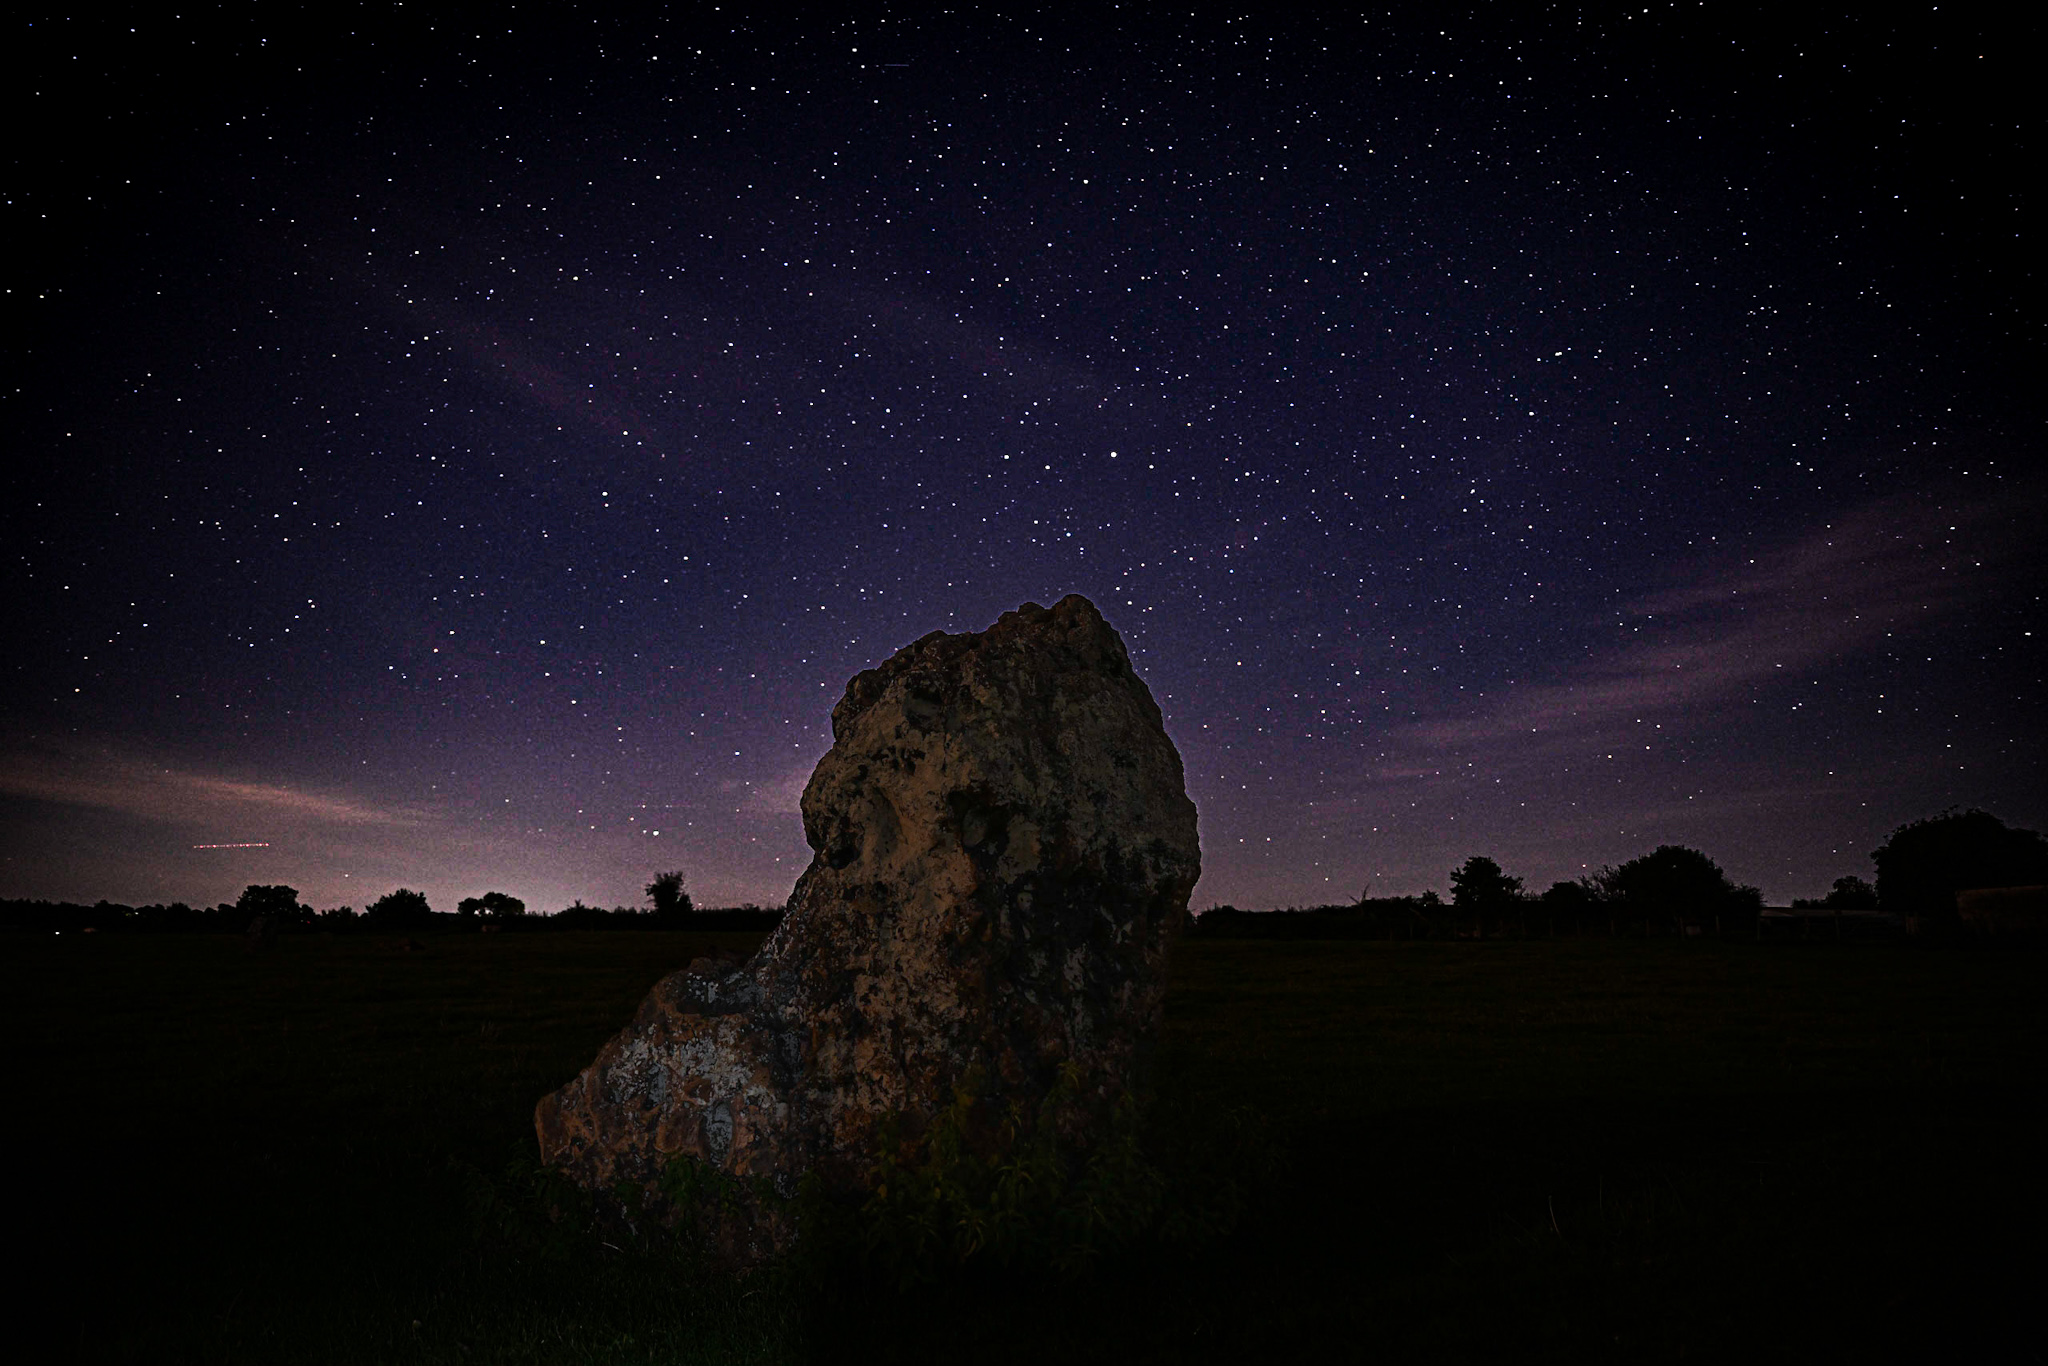 Example image showing the night sky above a big stone in a foreground landscape